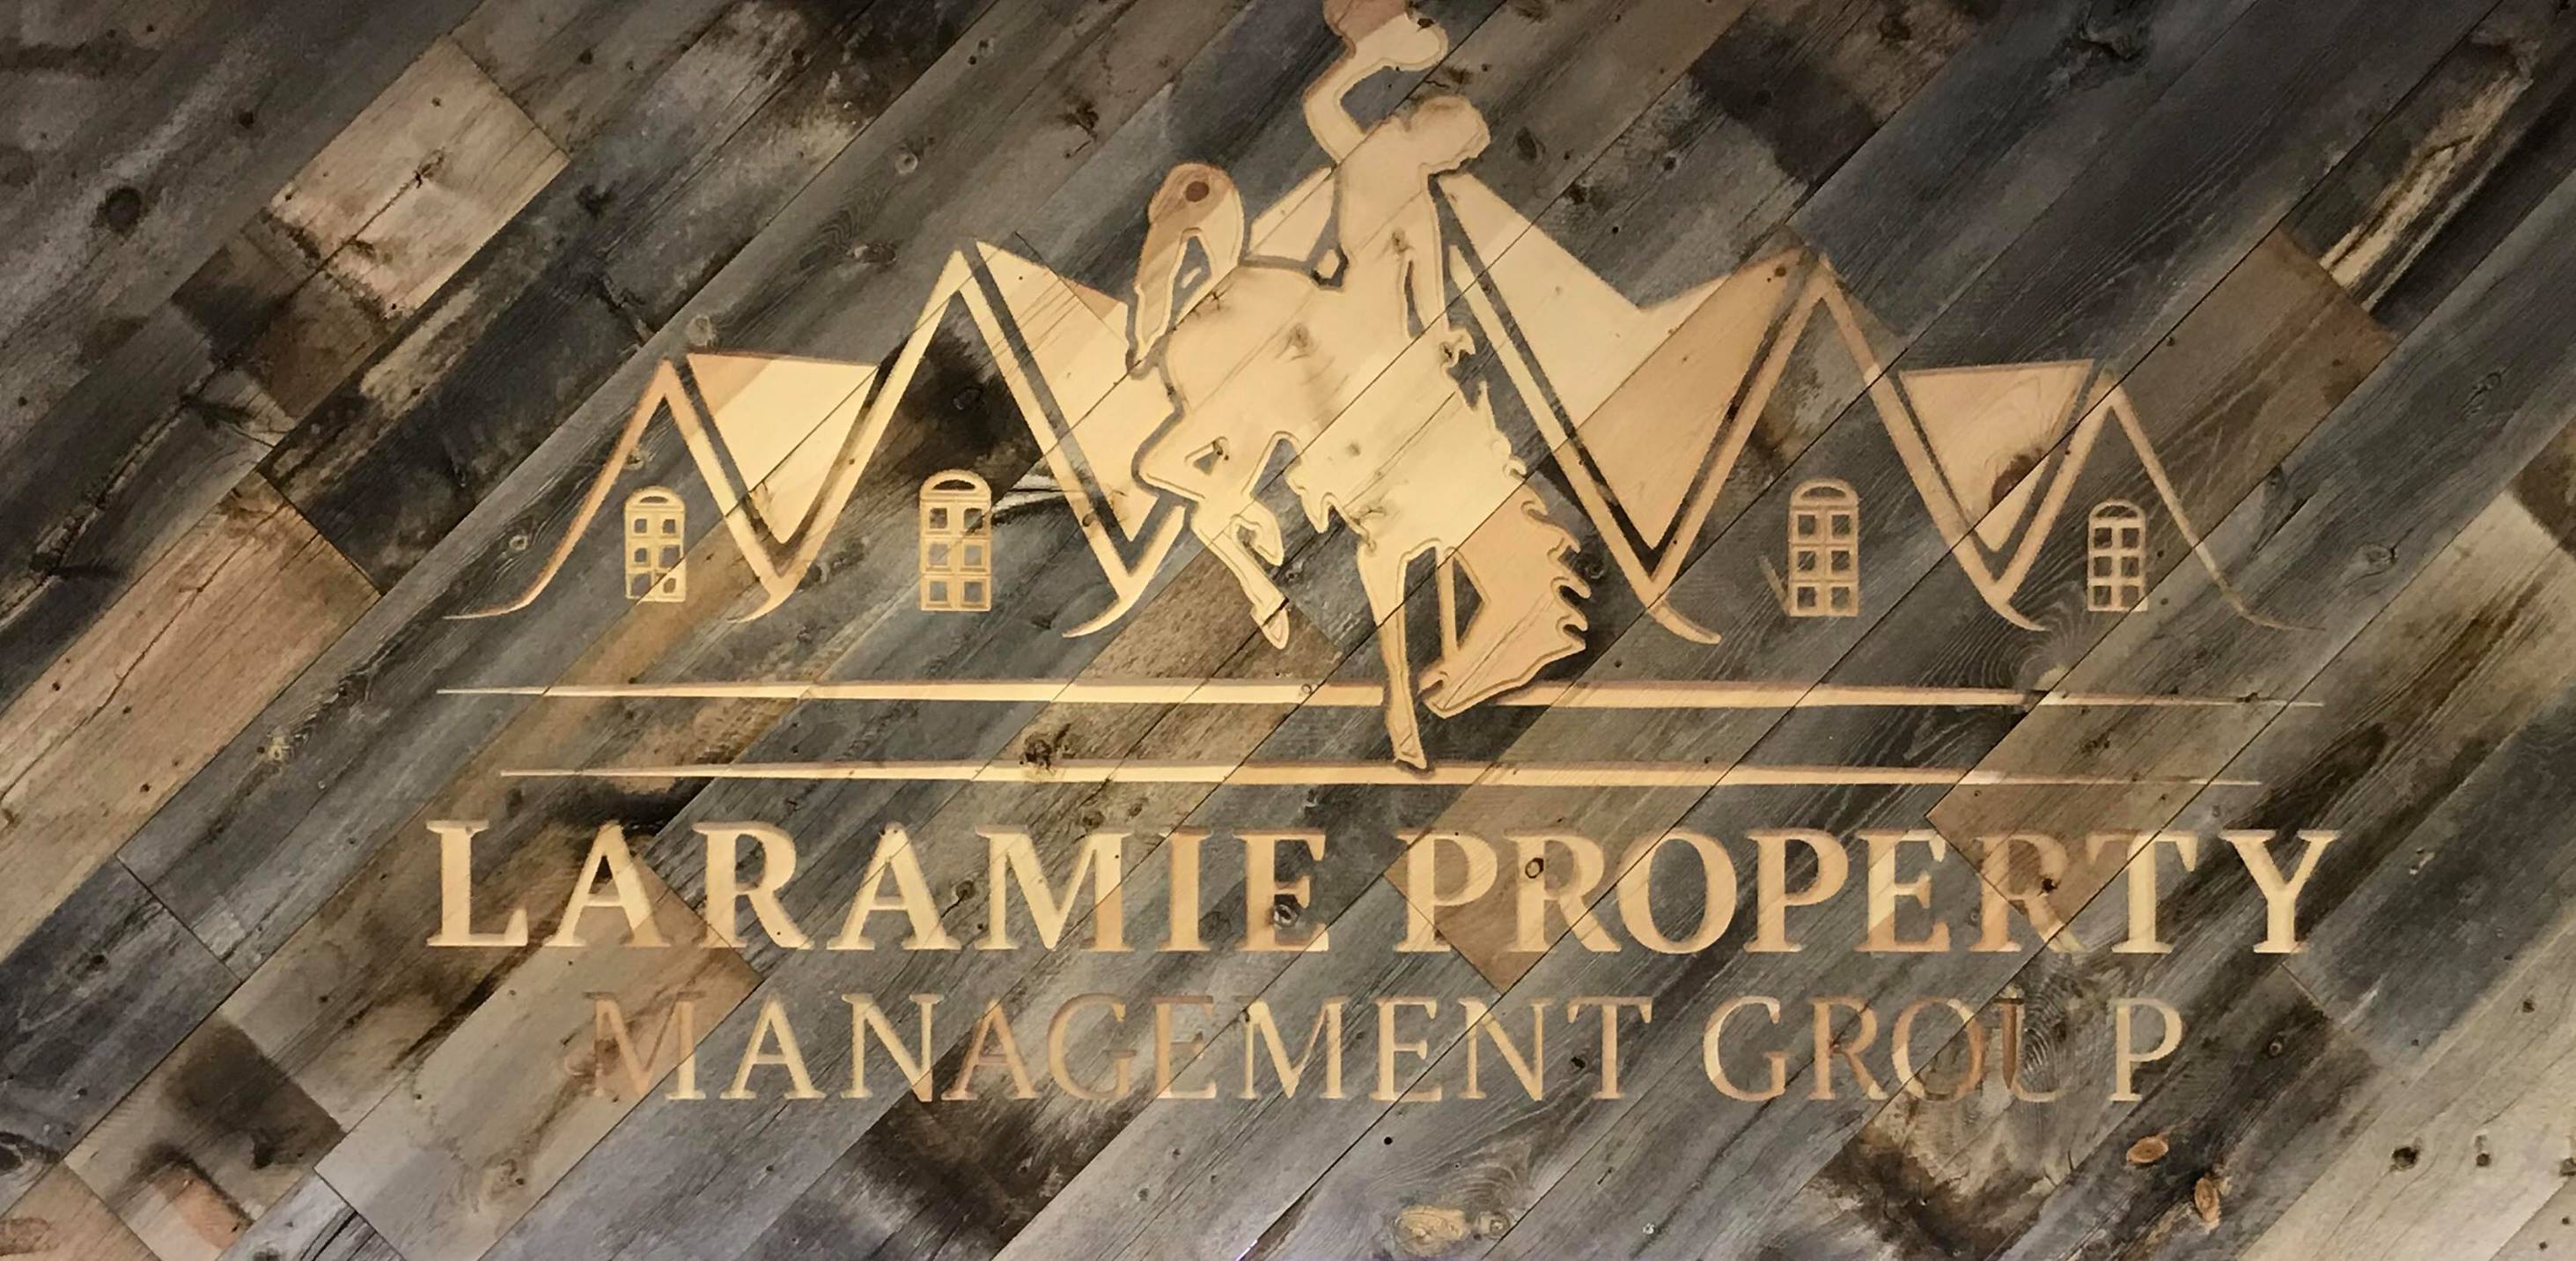 Laramie Property Management Group Home Page